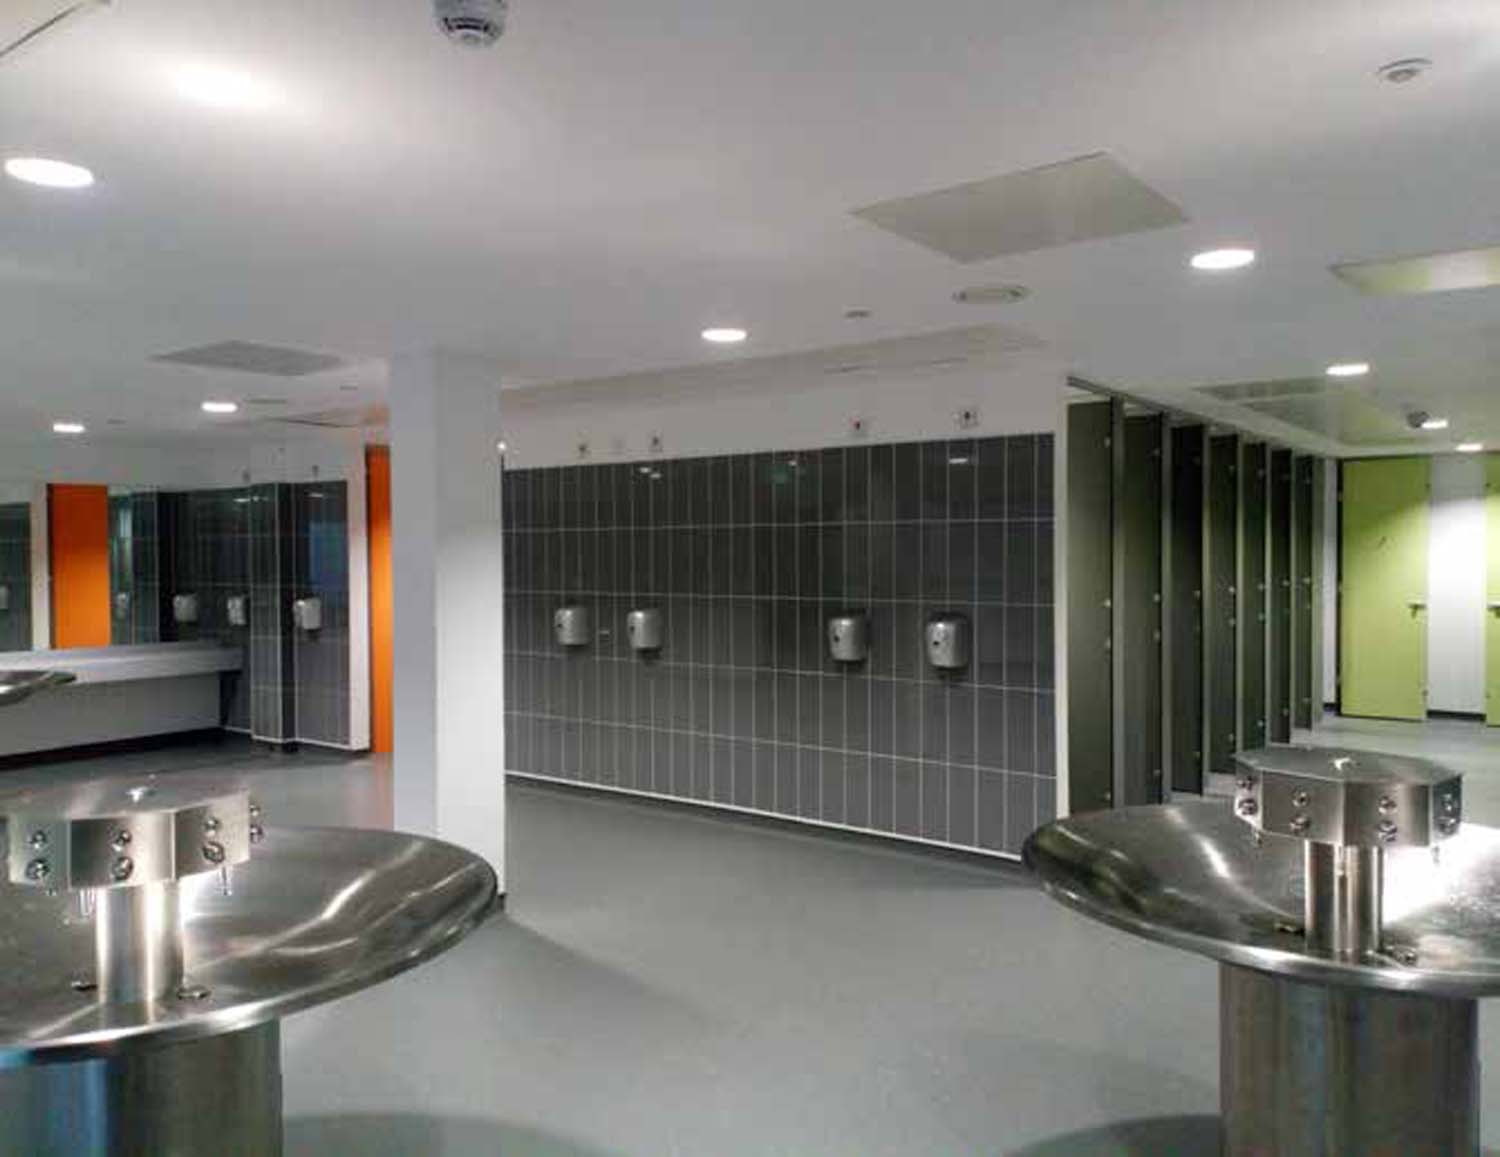 School toilets with orange and green cubicle doors.